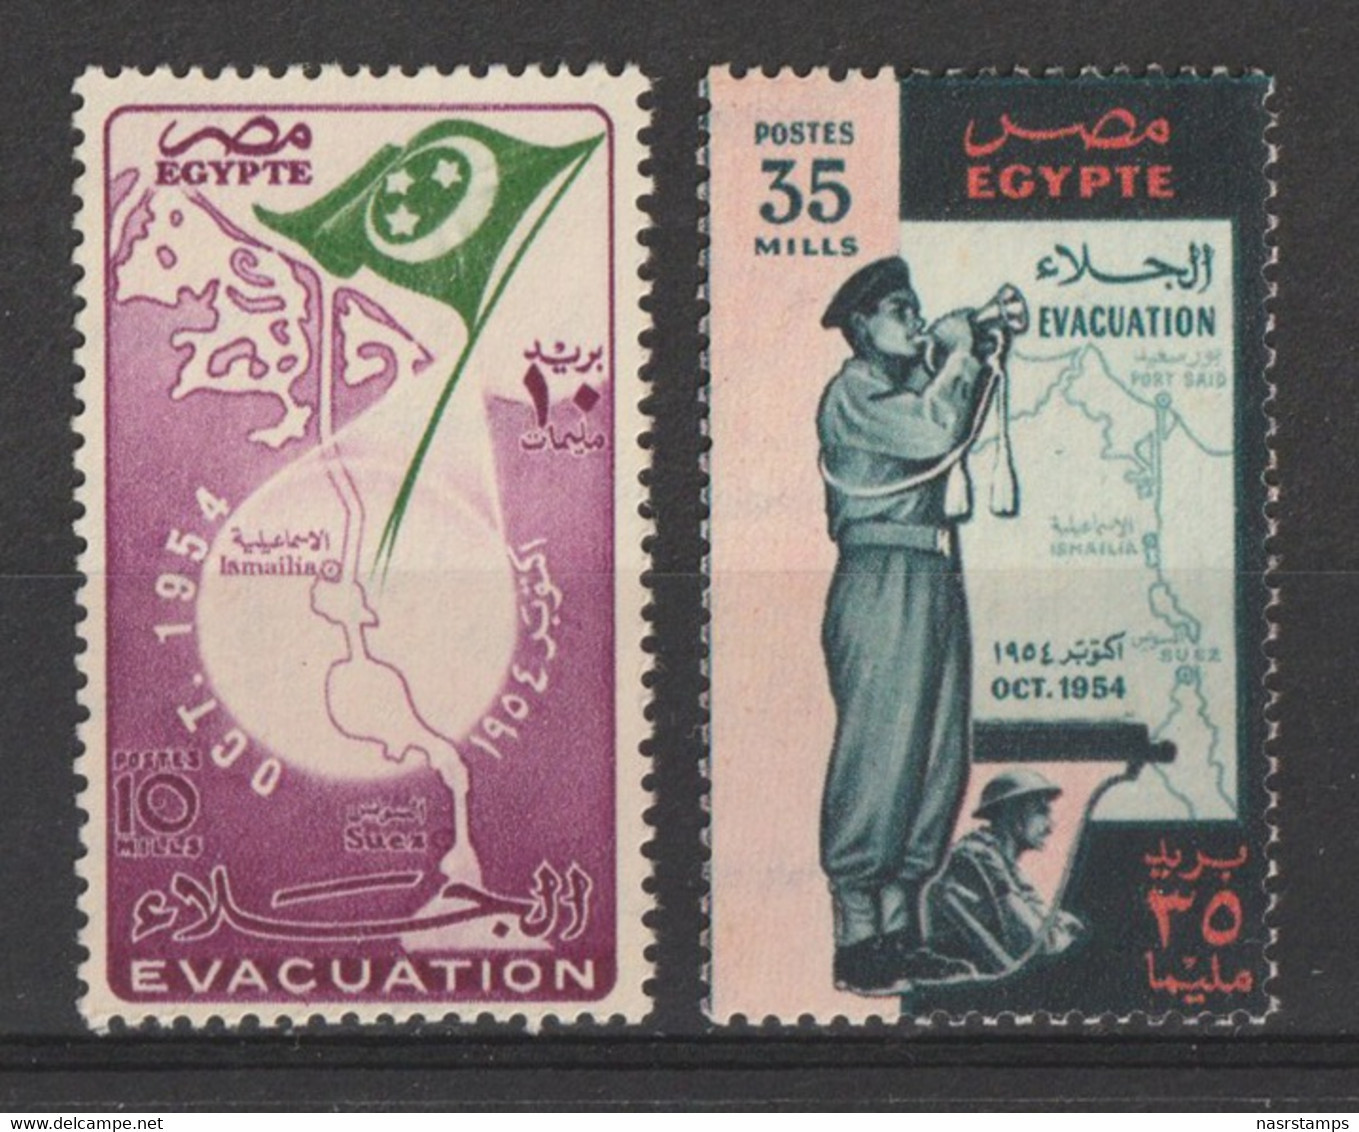 Egypt - 1954 - ( Agreement Of Oct. 19, 1954, With Great Britain For The Evacuation Of The Suez Canal ) - MNH (**) - Neufs